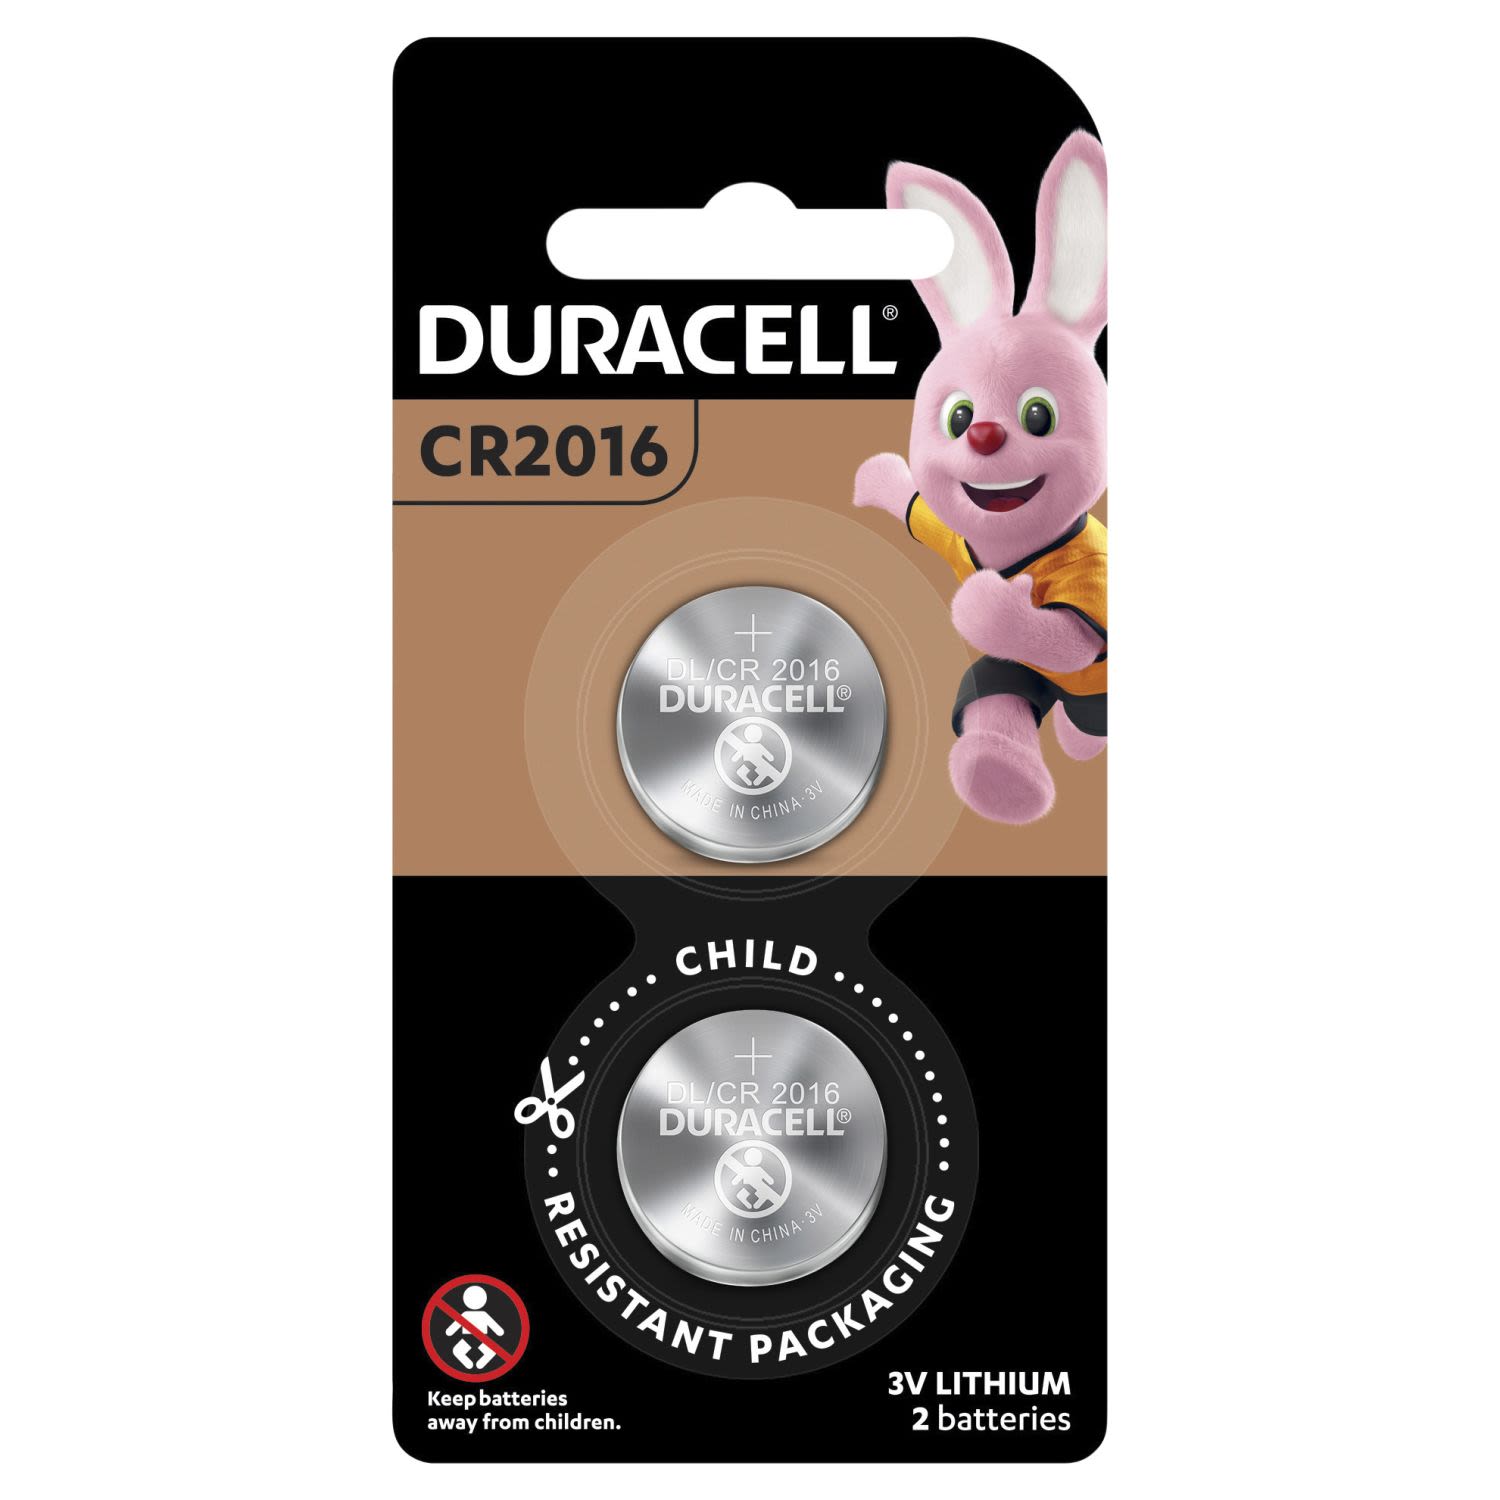 <p>DURACELL® DURALOCK™ POWER PRESERVE™ 2016 3V Lithium Batteries with Duralock Power Preserve™ Technology (to stays charged up to 6 months when not in use ) is the battery most trusted by the respected everyday experts. It provides “Power through the Unexpected”</p><br /> <br />